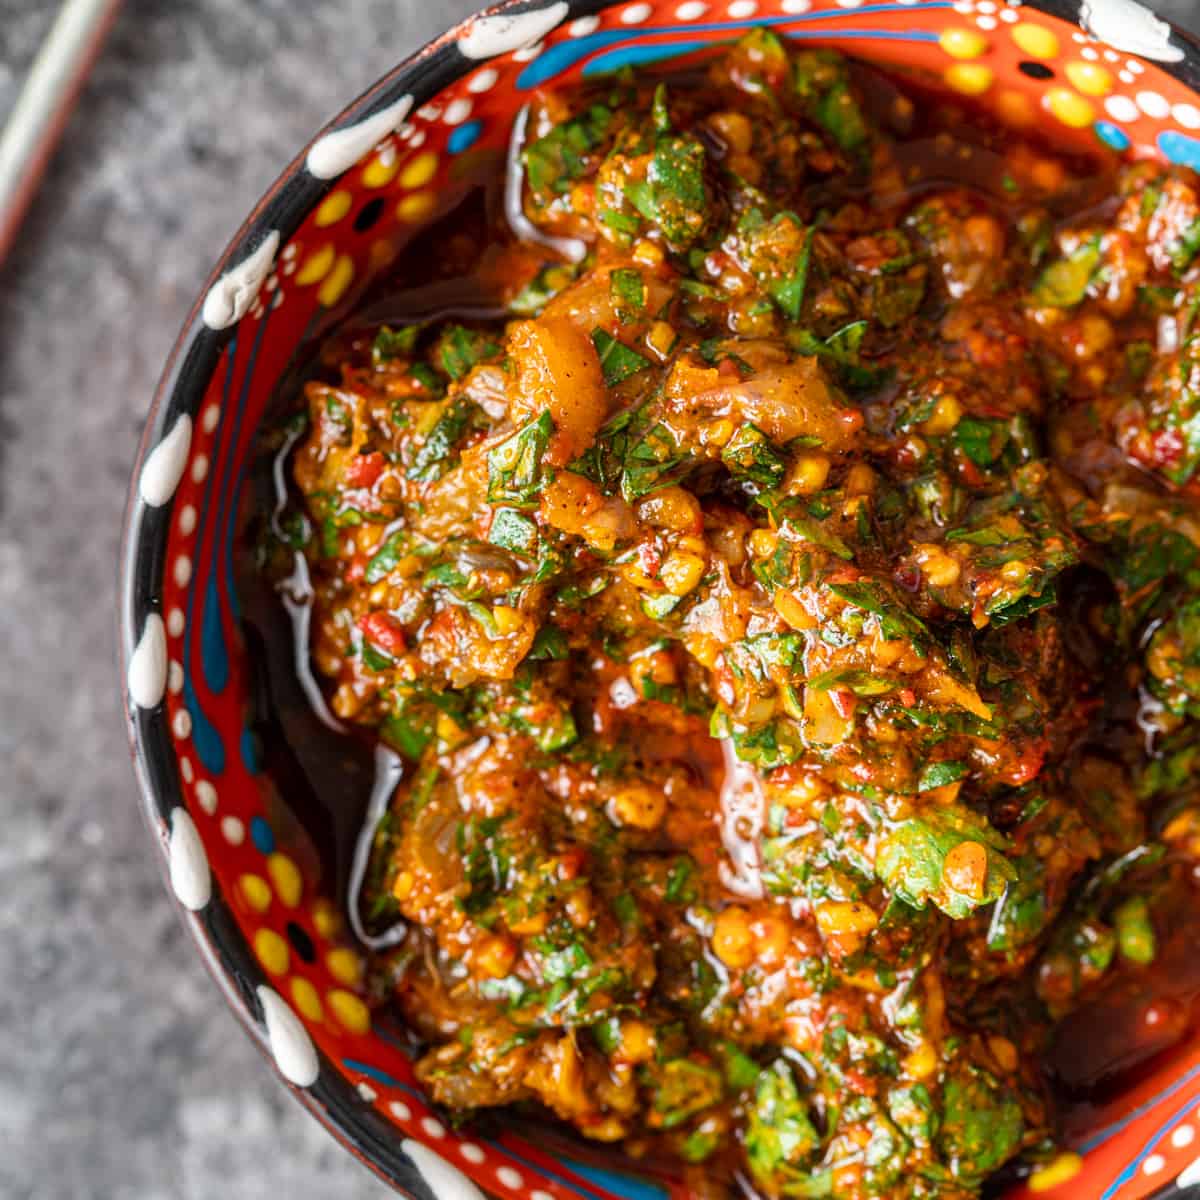 Chermoula (North African Relish) in a bowl